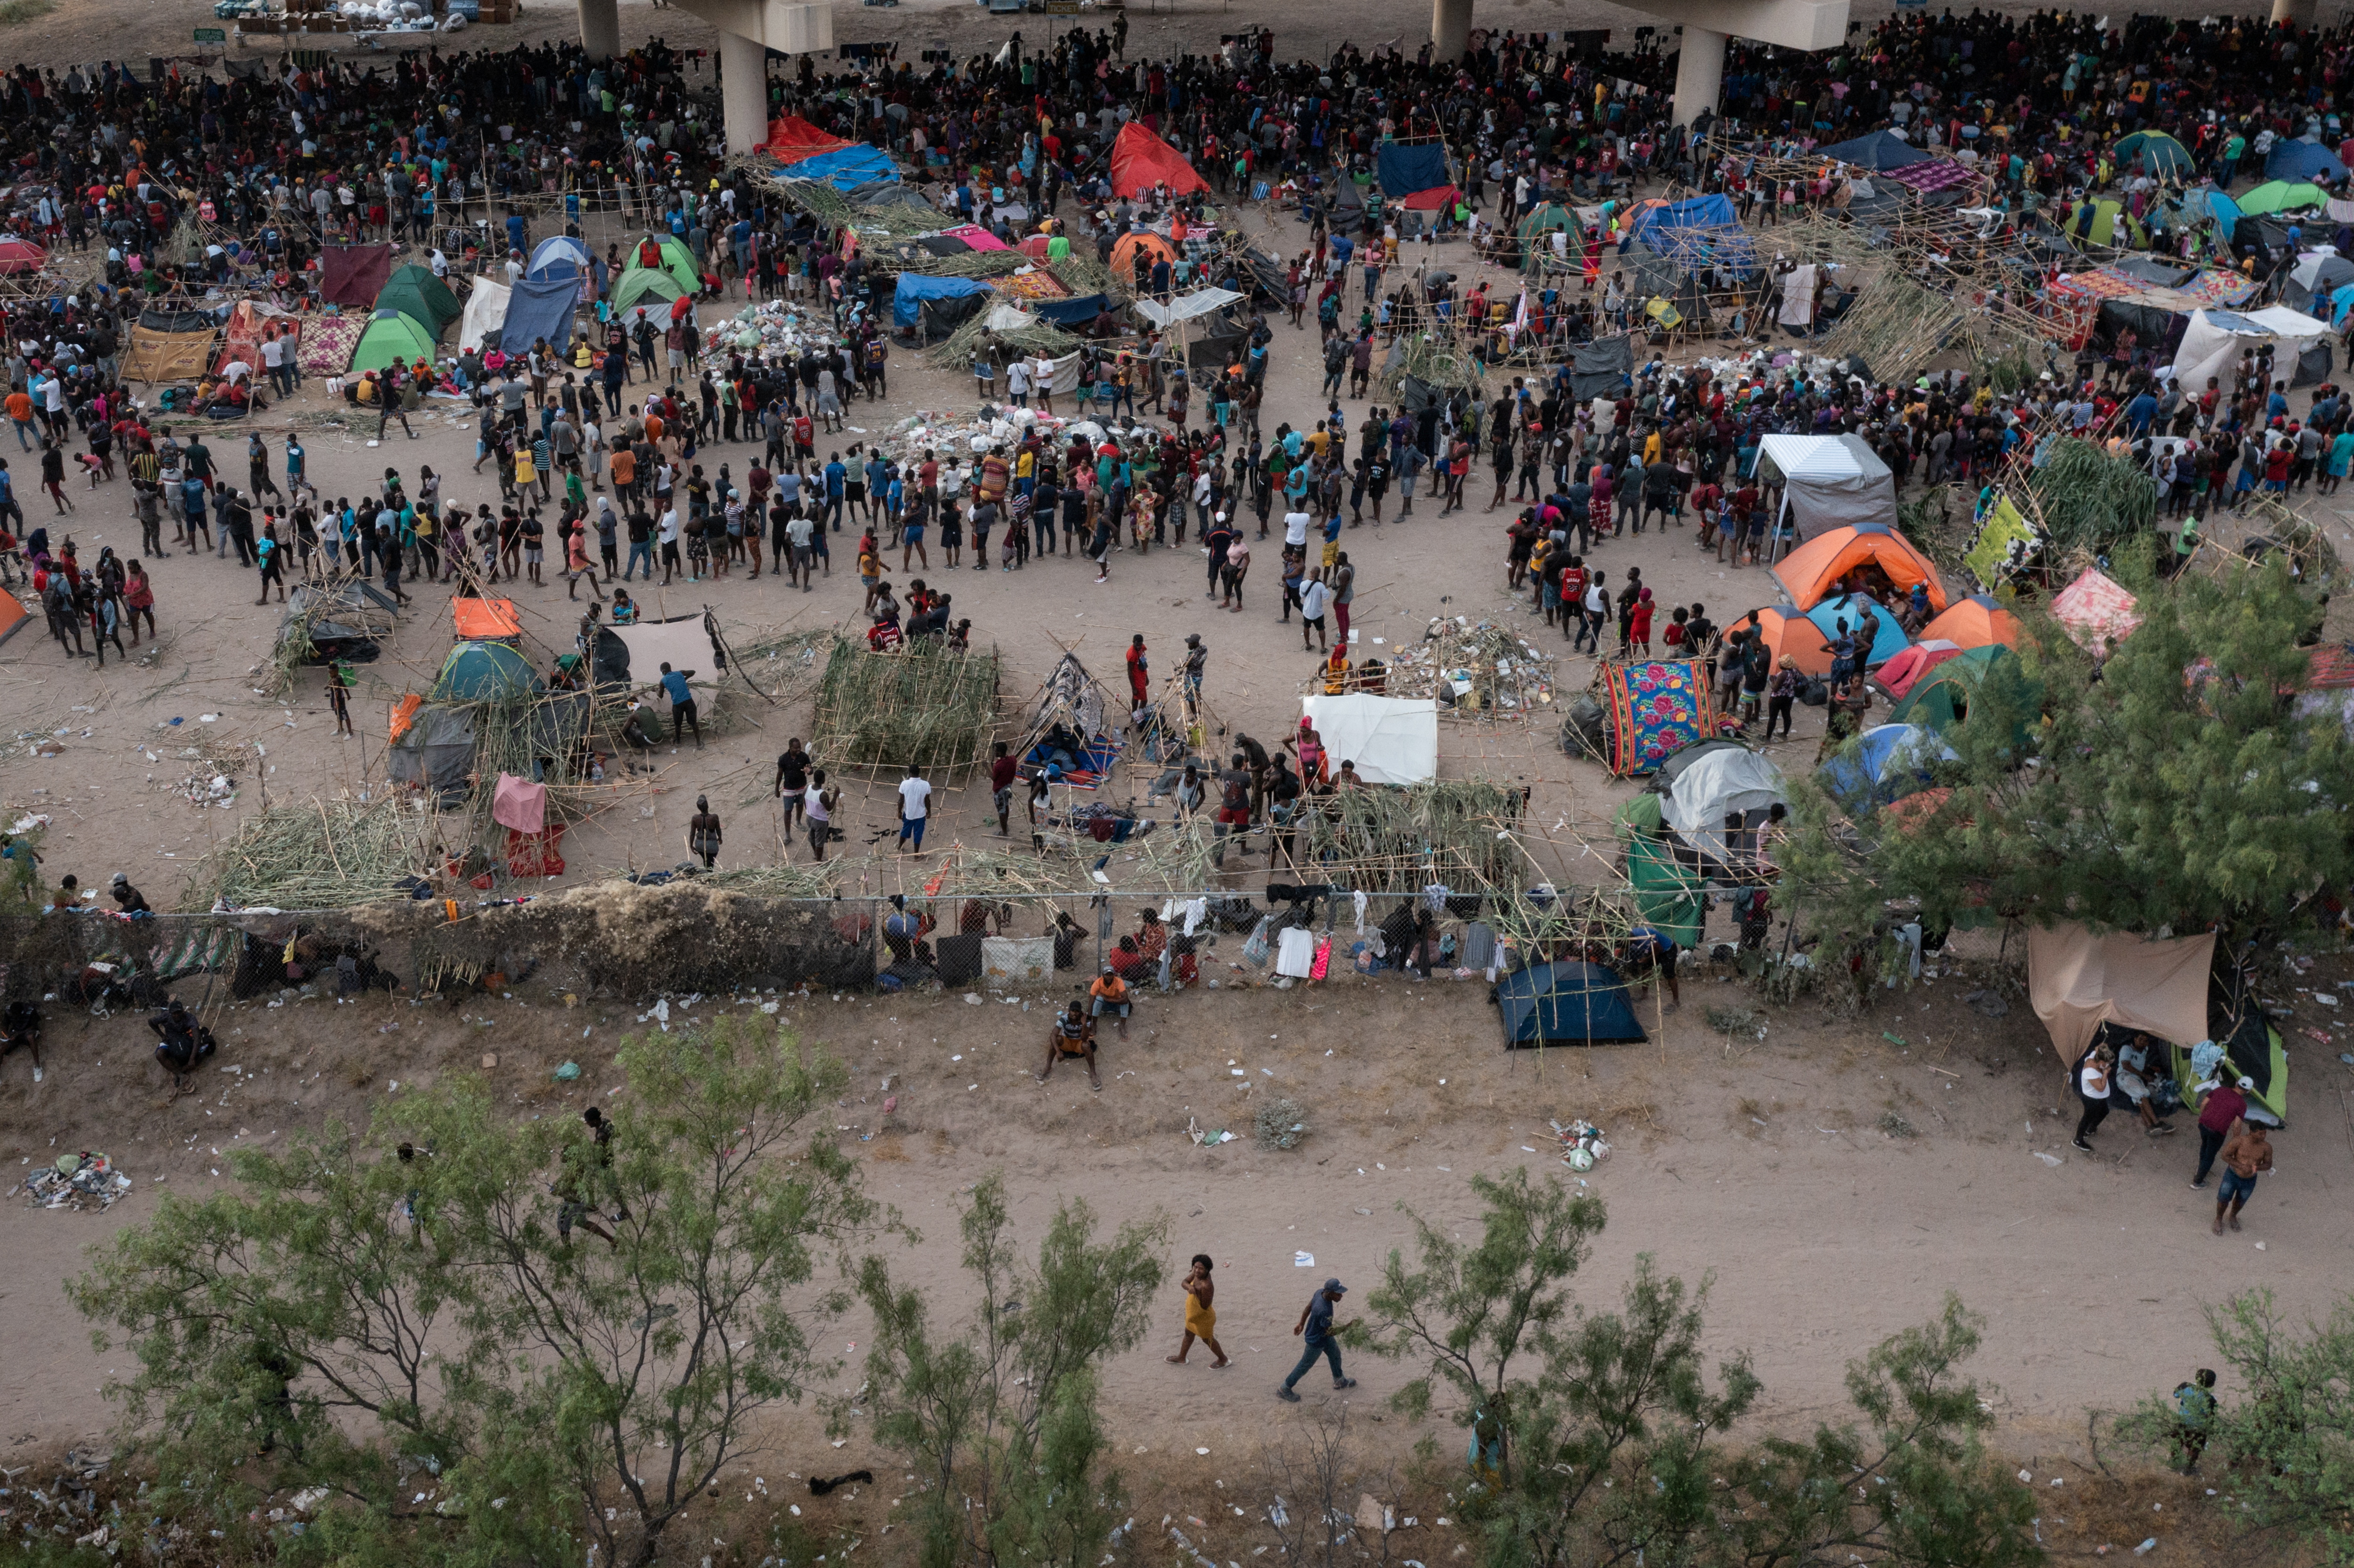 Some thousands of migrants take shelter as they await to be processed near the Del Rio International Bridge after crossing the Rio Grande river into the U.S. from Ciudad Acuna in Del Rio, Texas, U.S. September 18, 2021. Picture taken with a drone. REUTERS/Adrees Latif